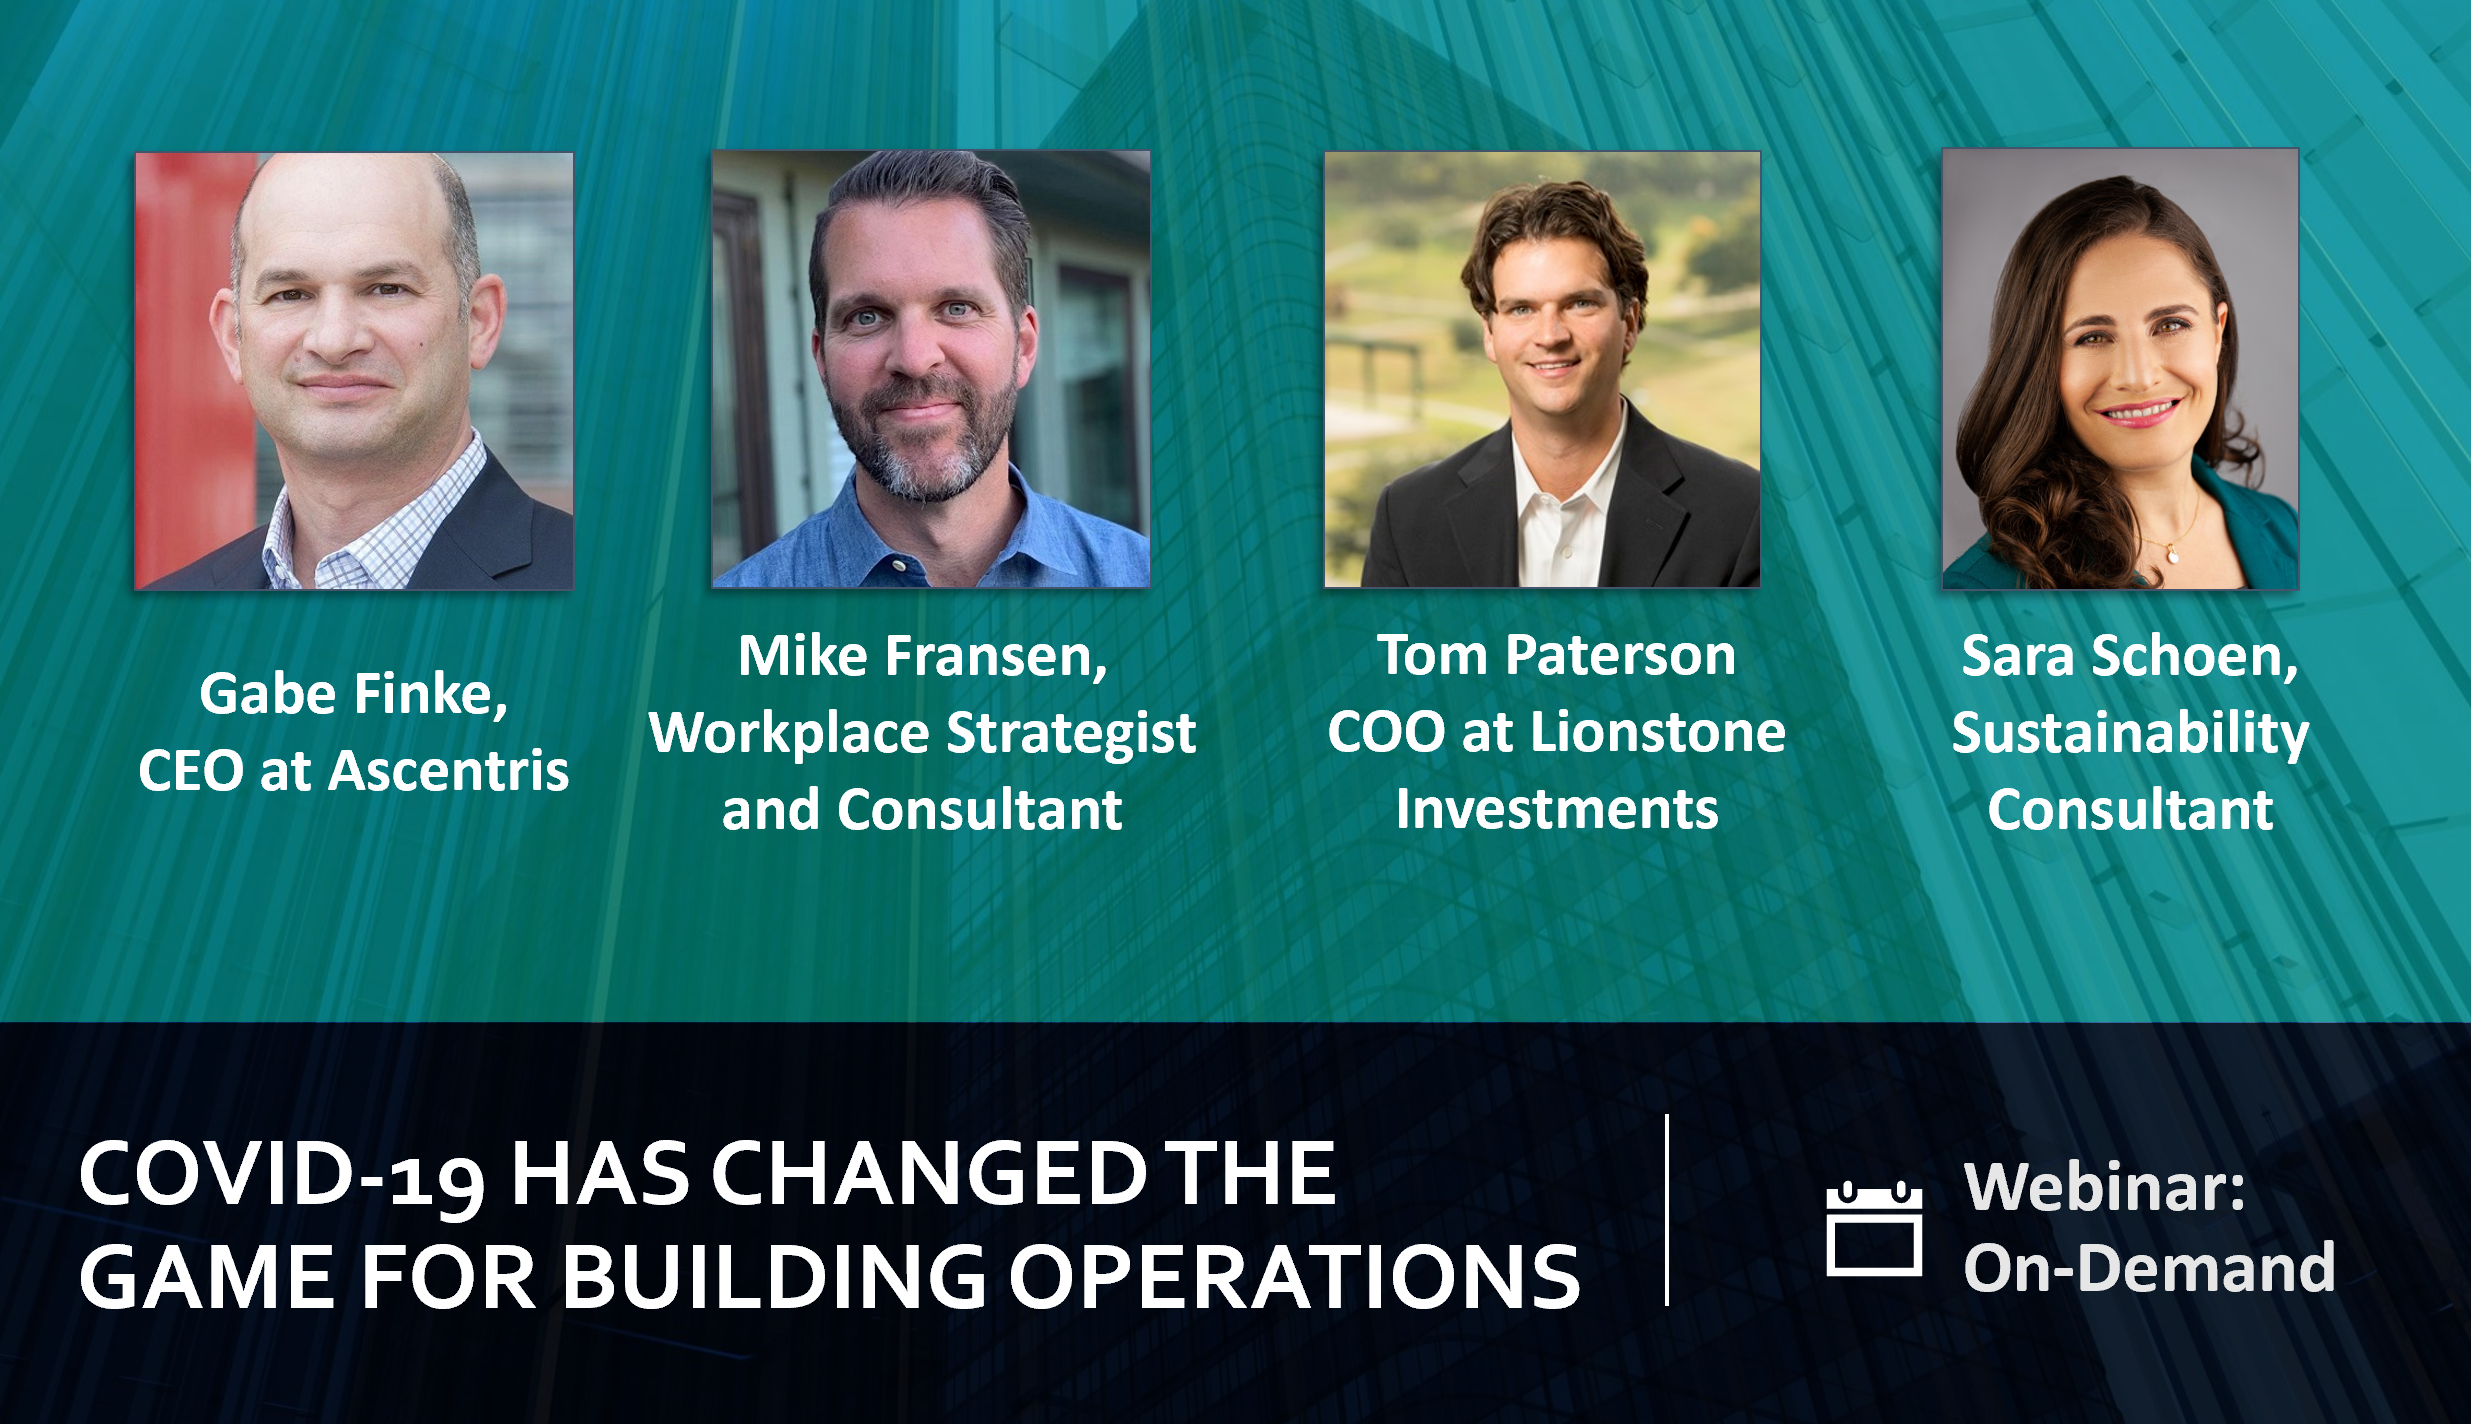 Webinar: COVID-19 Has Changed the Game for Building Operations